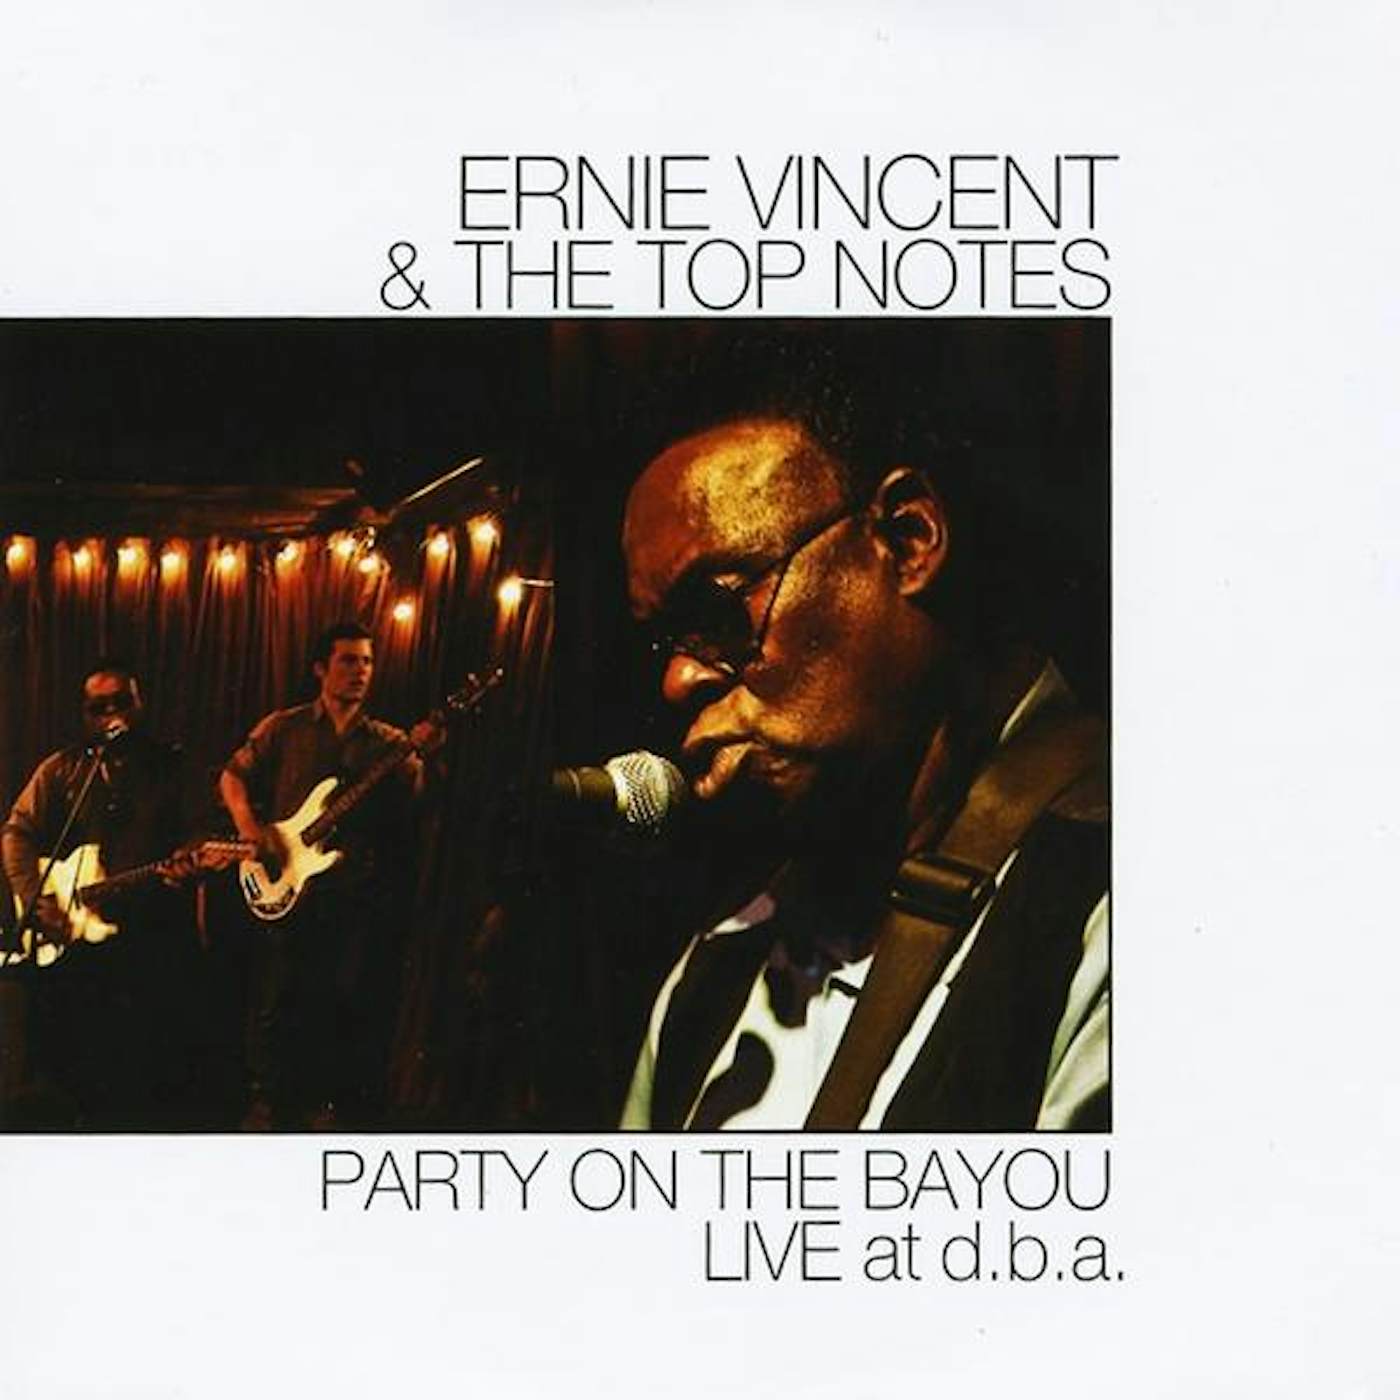 Ernie Vincent & The Top Notes PARTY ON THE BAYOU LIVE AT D.B.A. CD